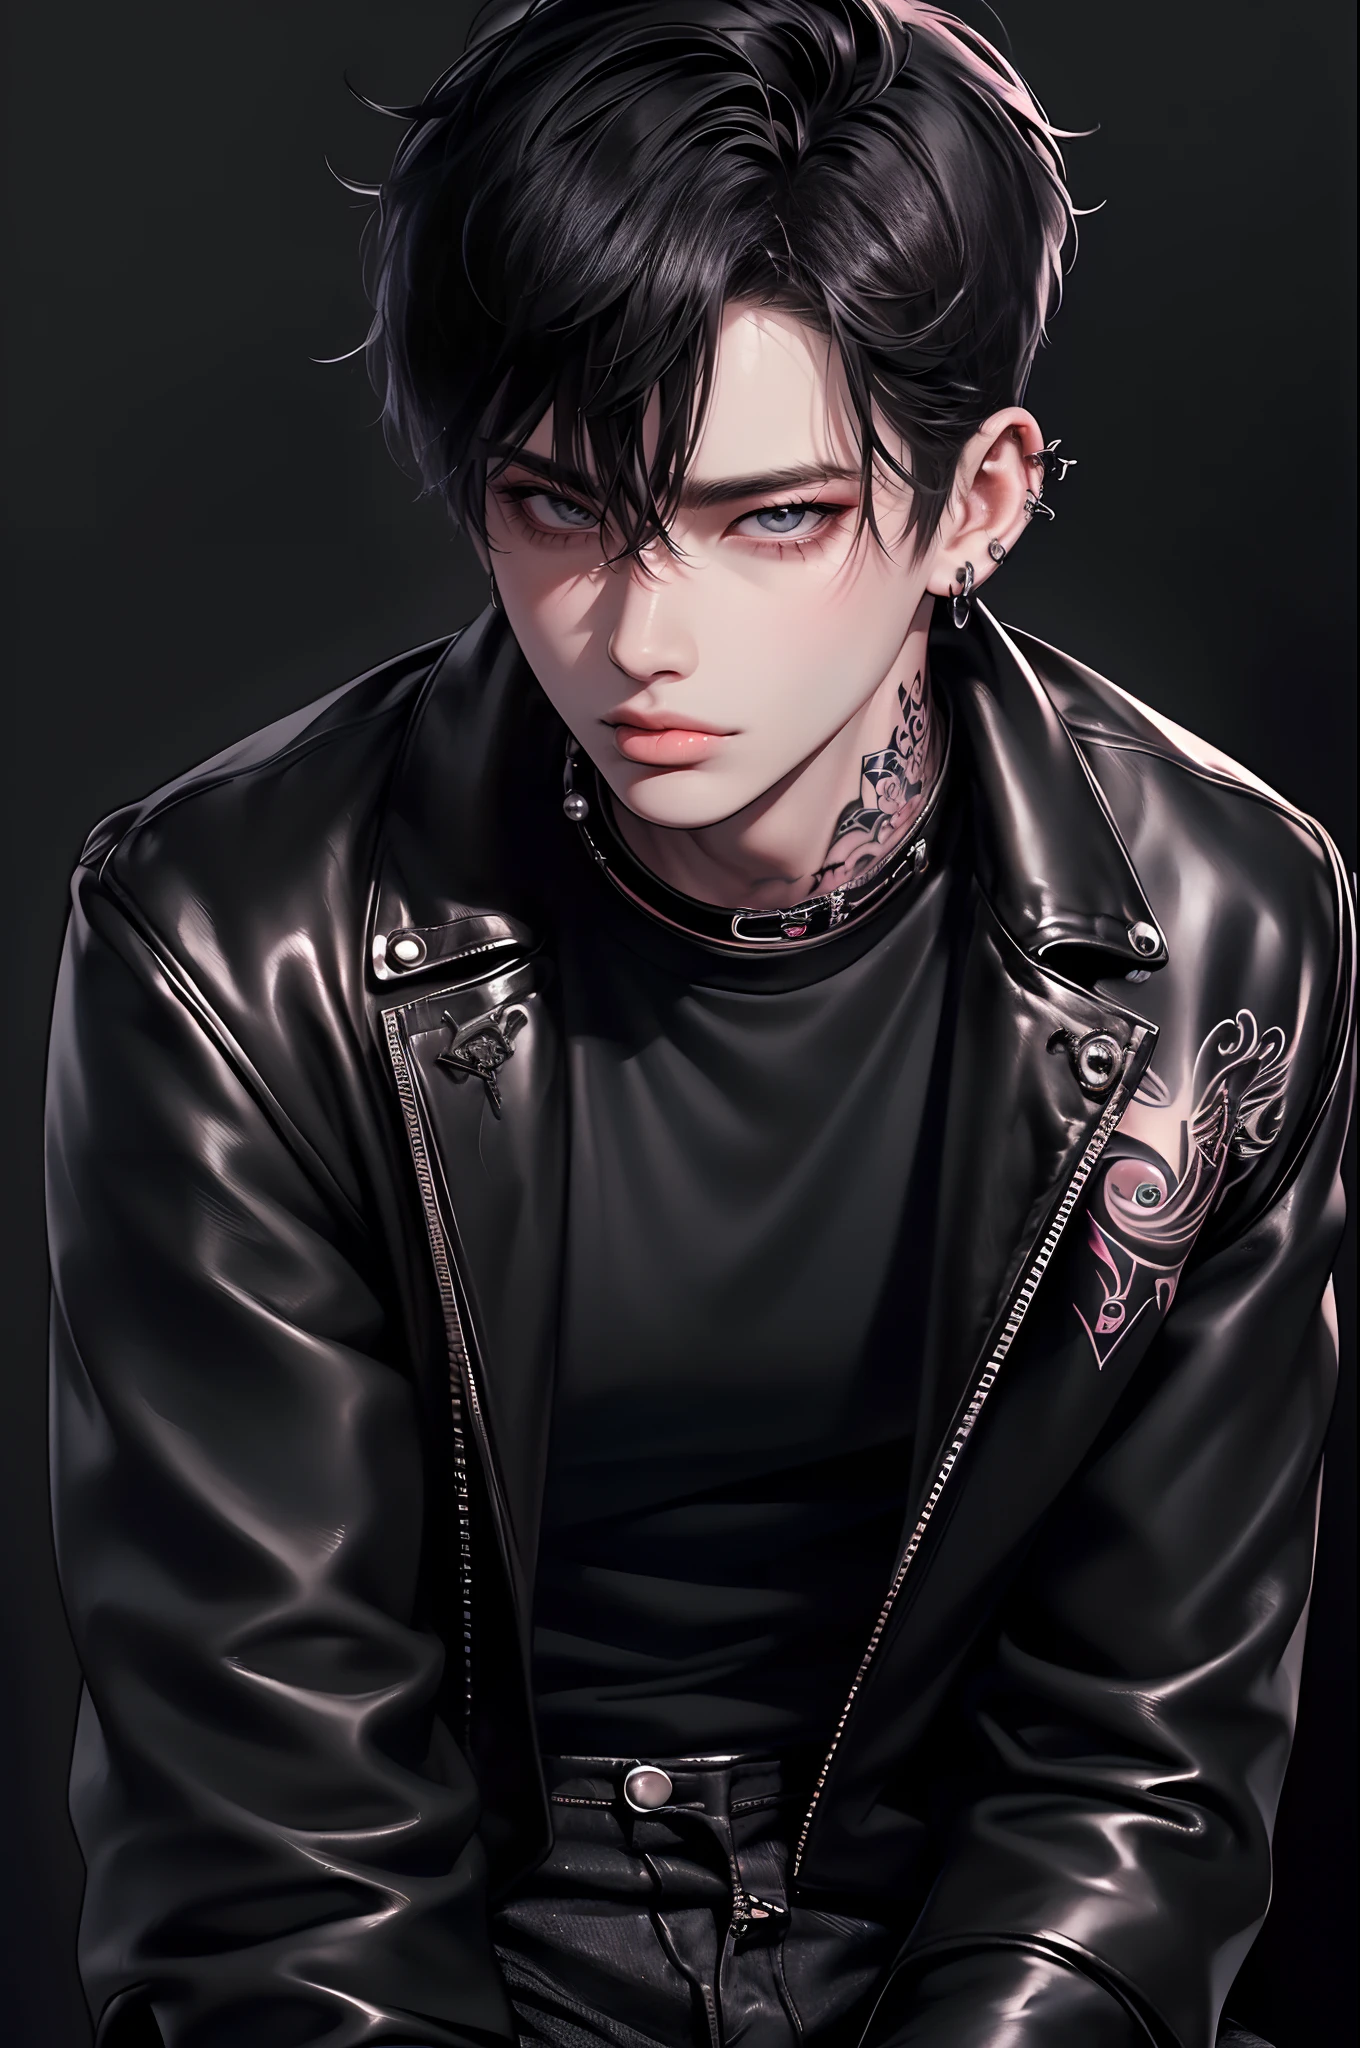 (4K works))、​masterpiece、(top-quality)、((Black cityscape background))、Korean Male、Adult male、((Adult 50 years old))、((Adult uncle type))、((Leather Jeans Style))、((Face similar to Hyunjin))、Cool Men、tall、((Wild features))、((Wild look))、((angry expressions))、((Long sleeve long trouser style))、((Smaller face))、Slim body、(((short-haired)))、((Shot alone))、((Solo Photography))、Professional Photos、((He is in front of the viewer))、((Upper body photography))、((Wear a lot of piercings))、((Piercing on the lips))、((Tongue piercing))、((Sick Boys))、((Mine Boys))、((Lots of tattooine photo))、((sassy pose))